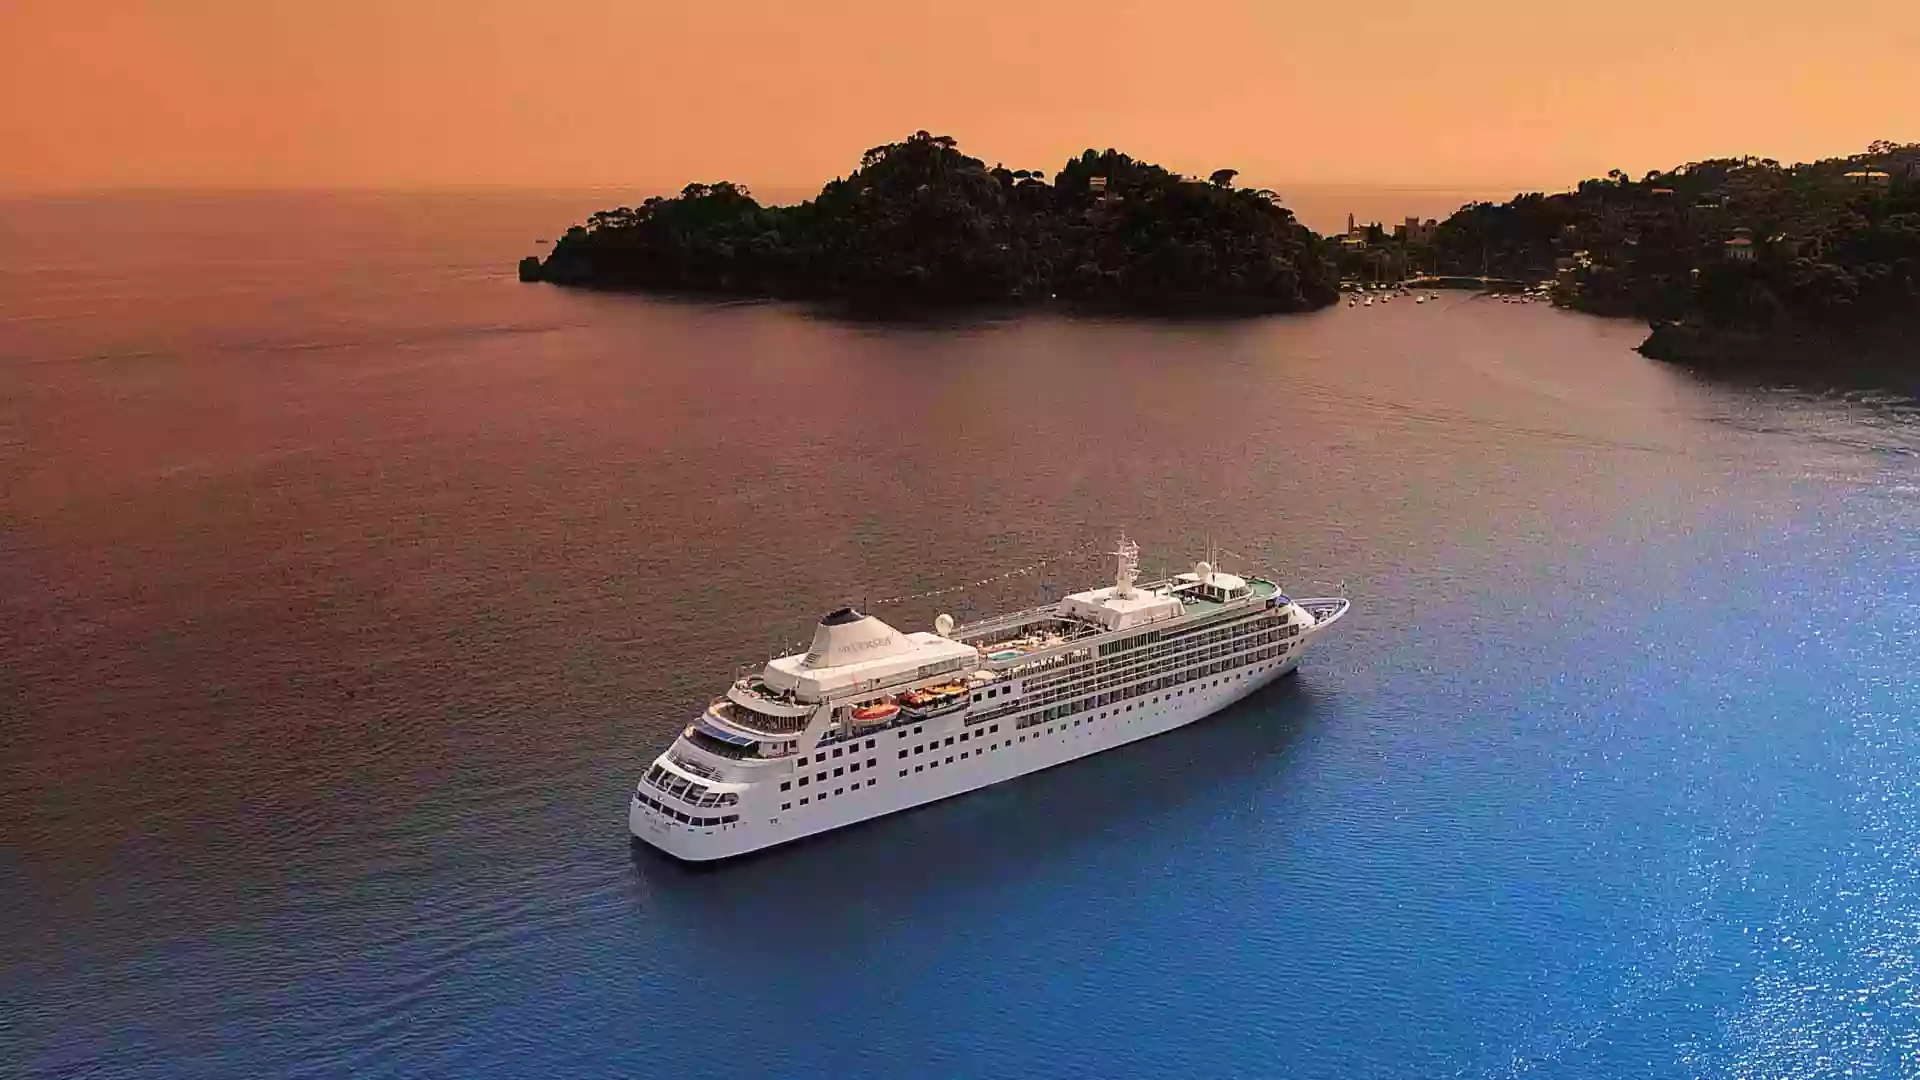 Luxury Cruise Connections